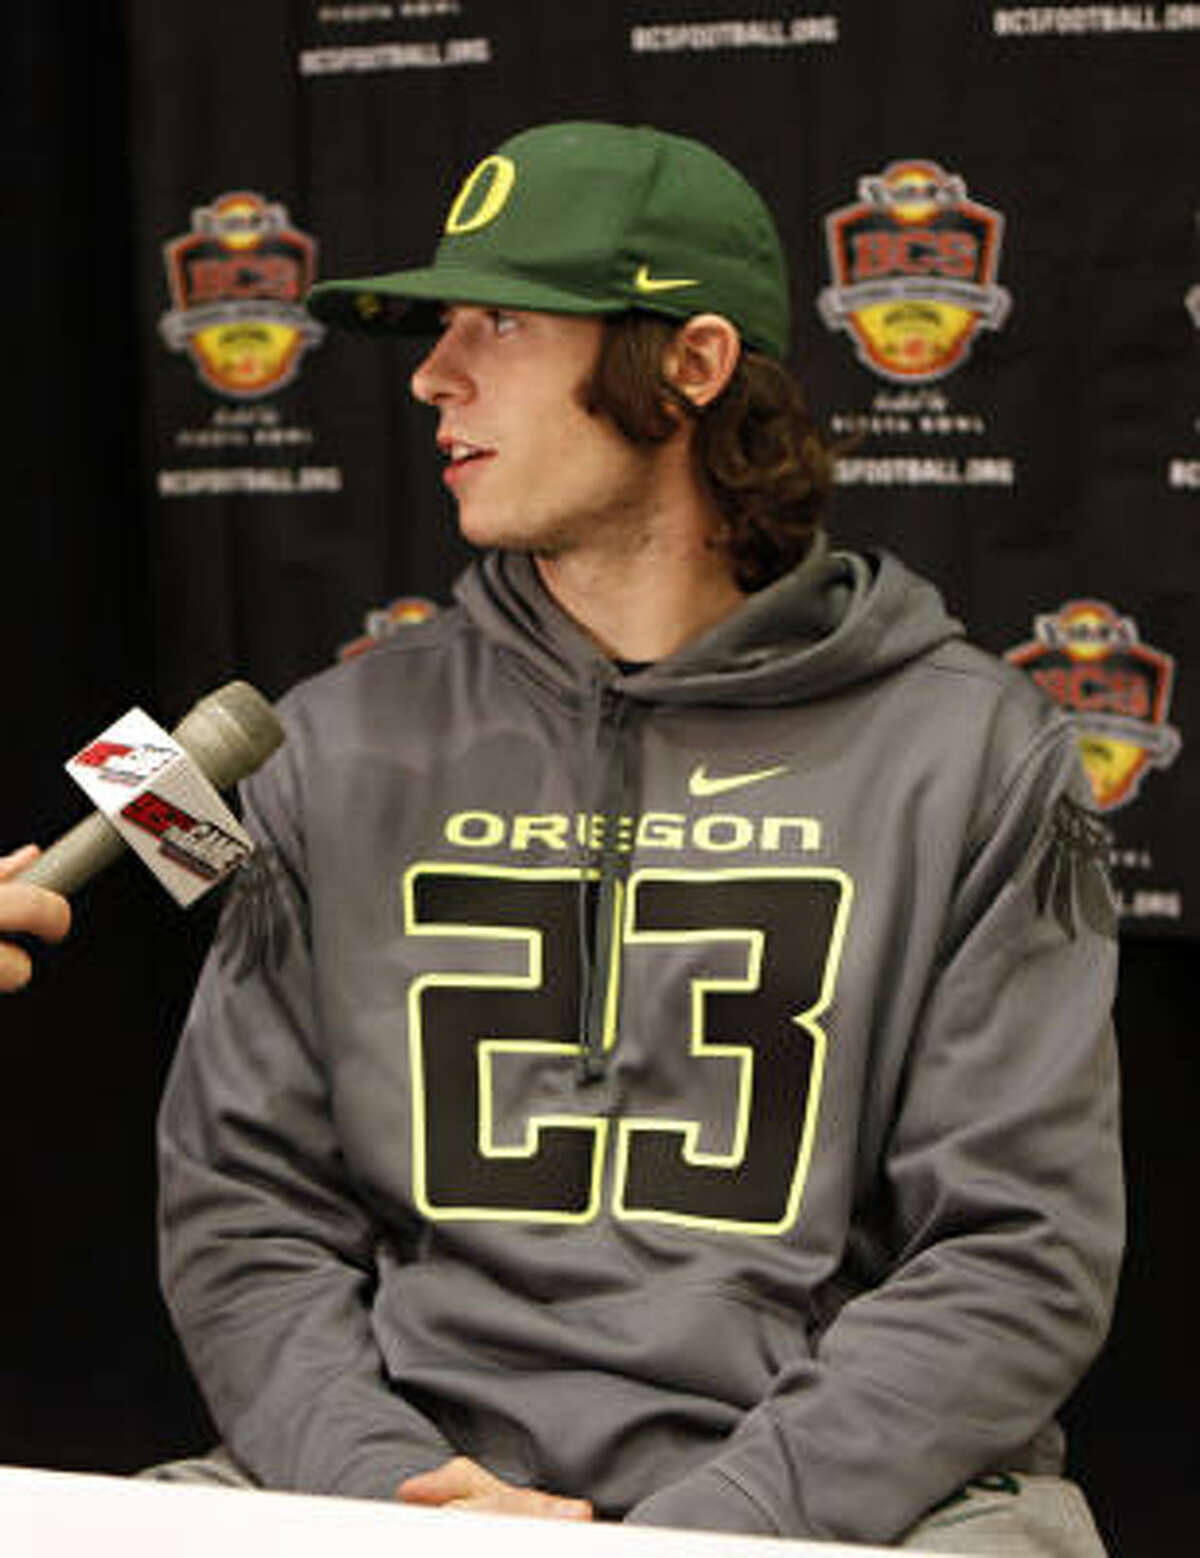 Receivers Jeff Maehl, a safety as a freshman, already has the Oregon season record with 12 TD receptions, and with one more he'll own the career mark. He has 68 catches for 943 yards, which is similar to Auburn's Darvin Adams (48-909, 7 TDs). Oregon's second- and third-leading receivers (Drew Davis, Davis Paulson) combined for 57 catches, while Auburn's (Terrell Zachery, Emory Blake) have 58. Edge: even